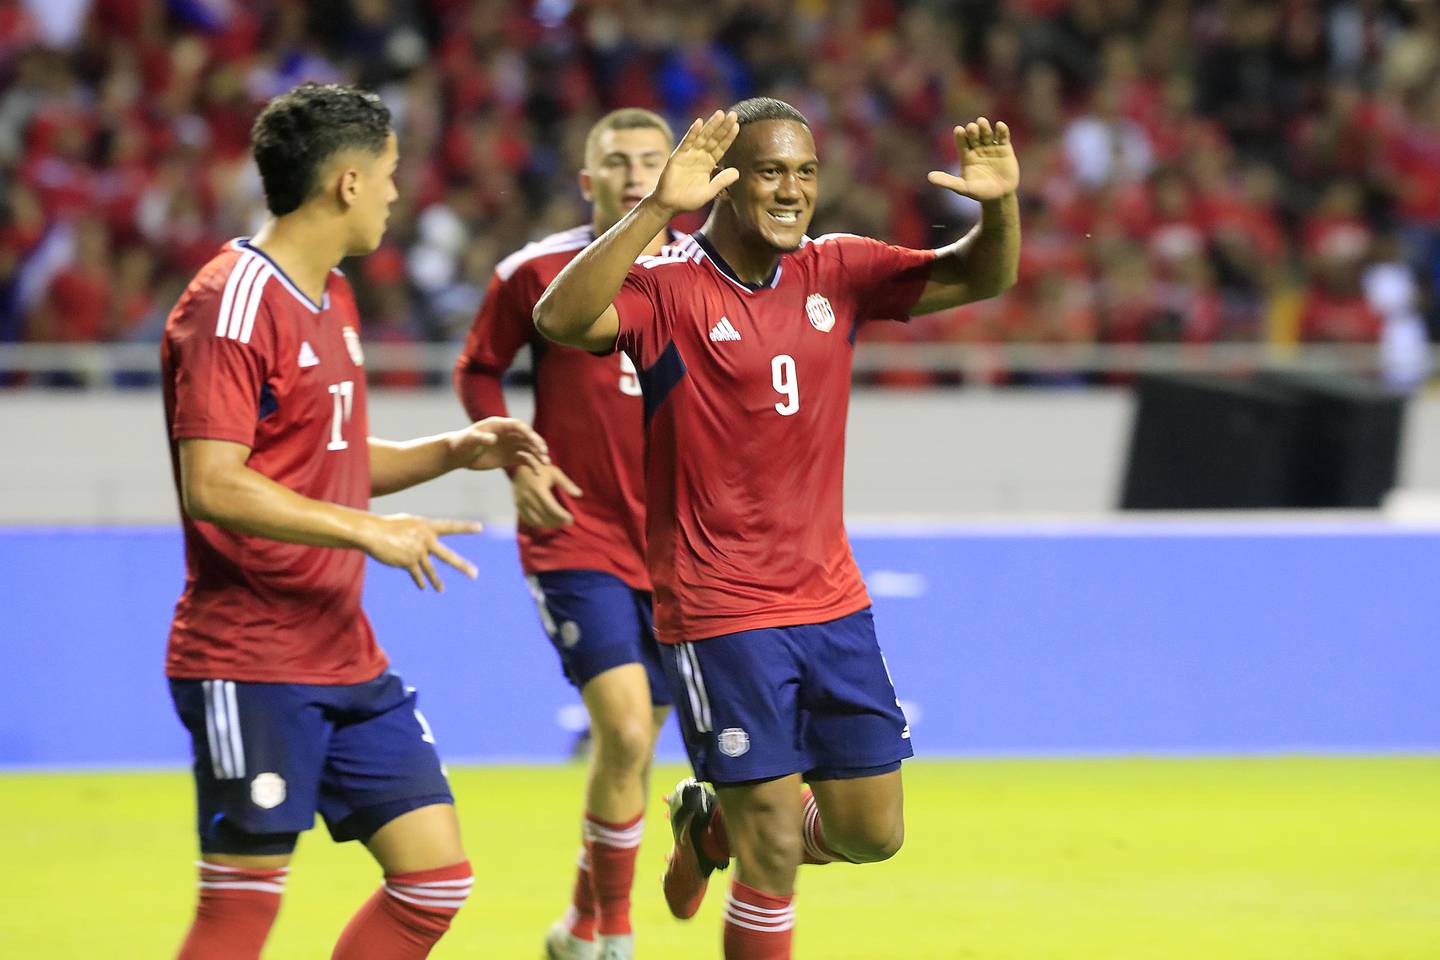 The Costa Rican national team had a lackluster win against a harmless opponent